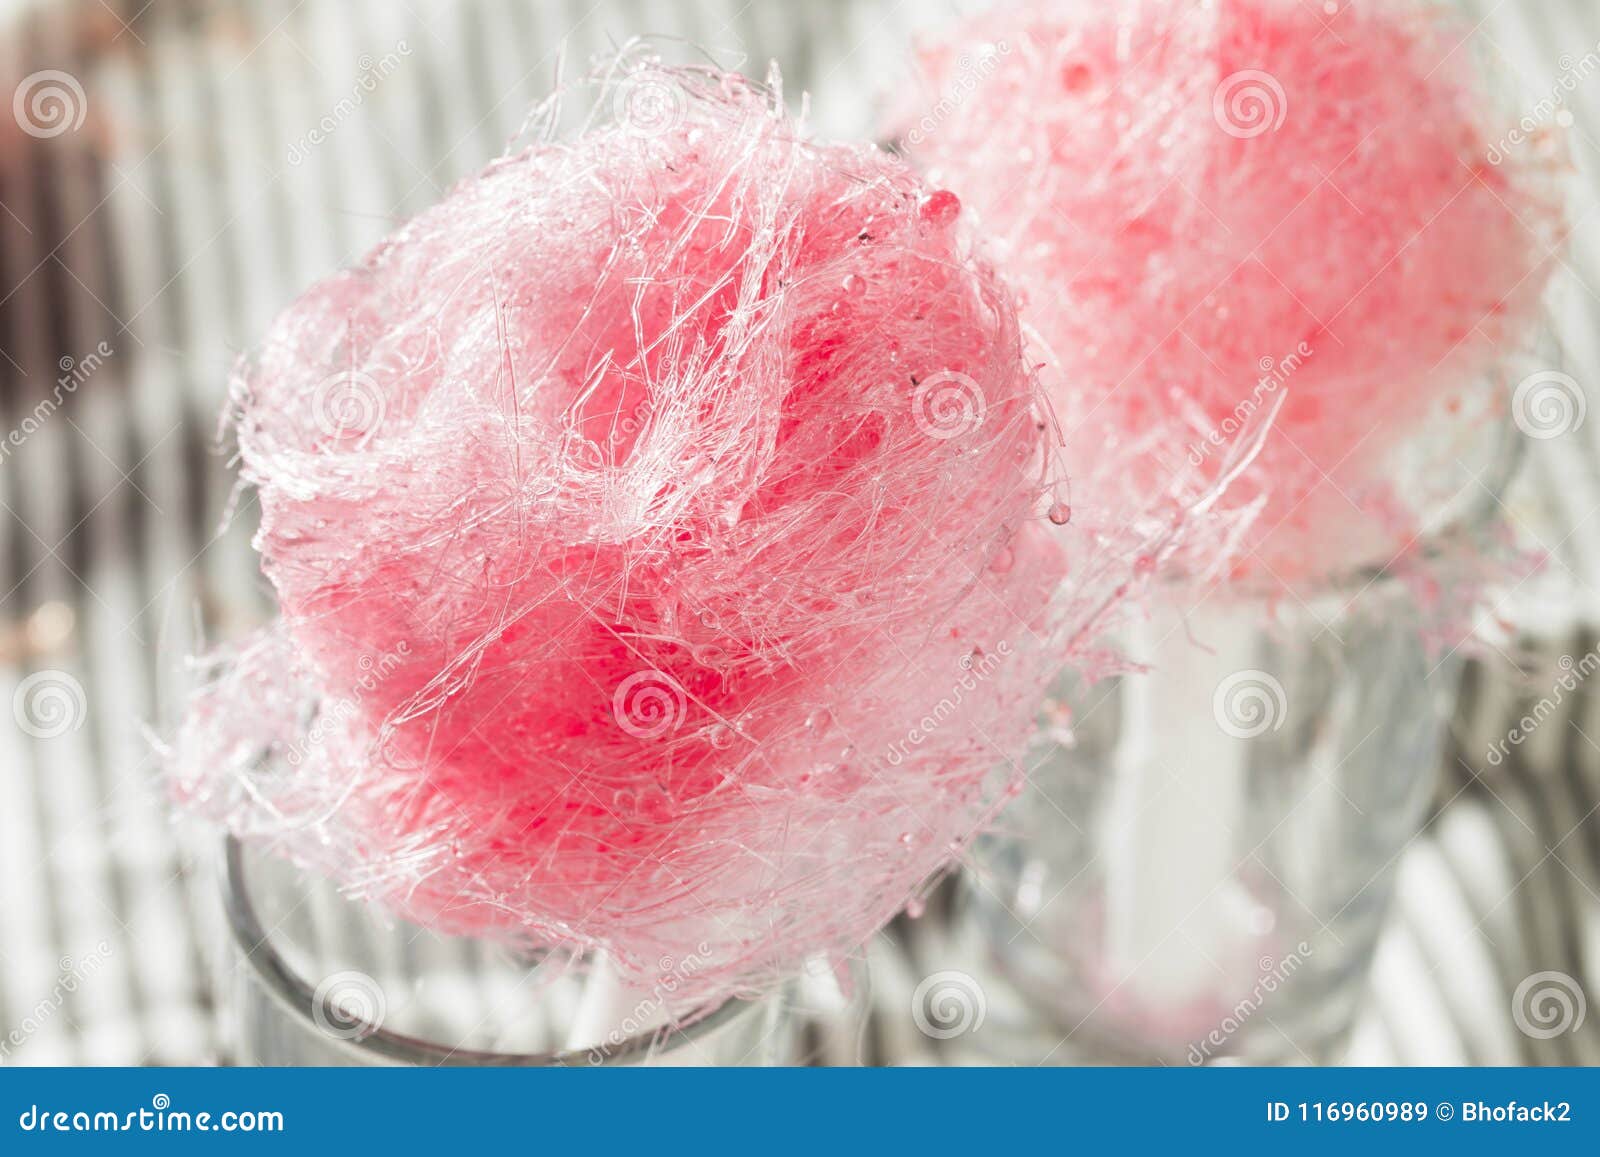 akse Shaded Forventer Sugary Pink Homemade Cotton Candy Floss Stock Image - Image of soft,  confectionery: 116960989